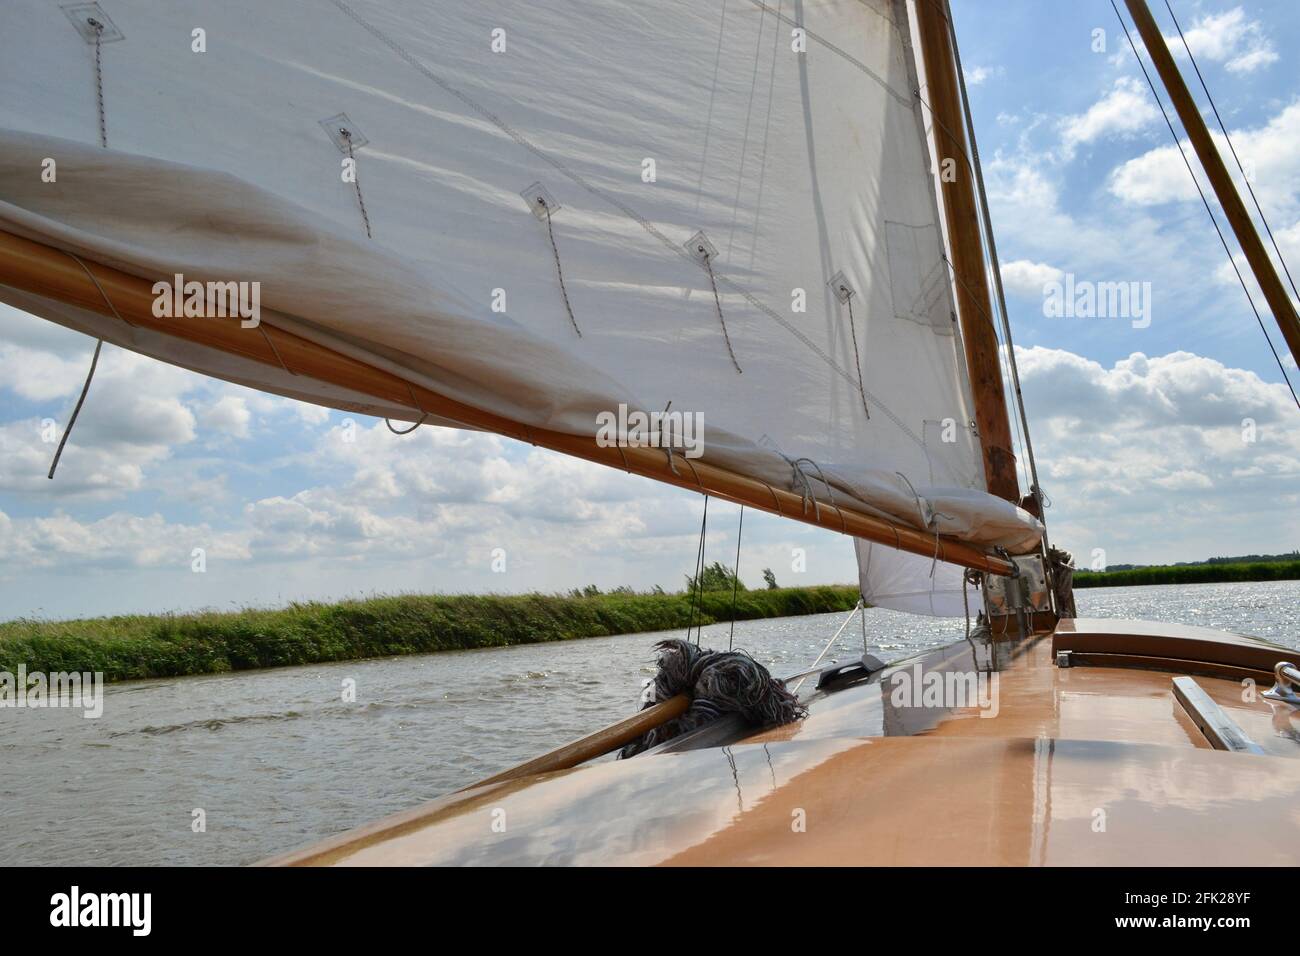 Looking forward along the cabin top of a traditional sailing yacht: a brown boat with white sails, on a summer's day, sailing along a river (Norfolk B Stock Photo